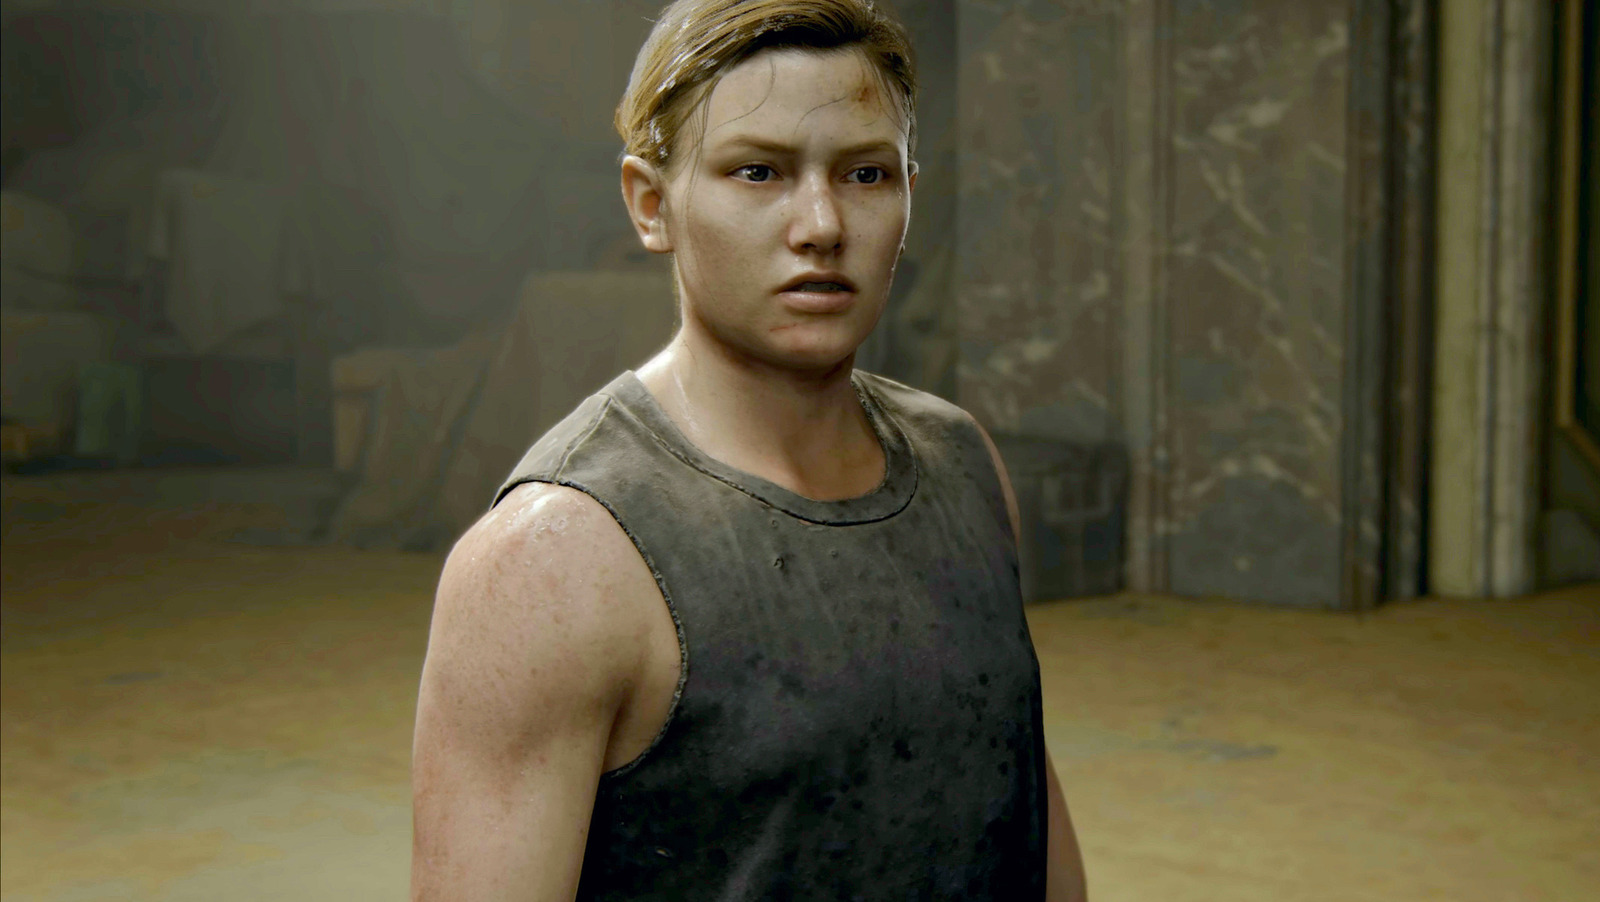 The Last Of Us Season 2 Better Make Abby Ripped